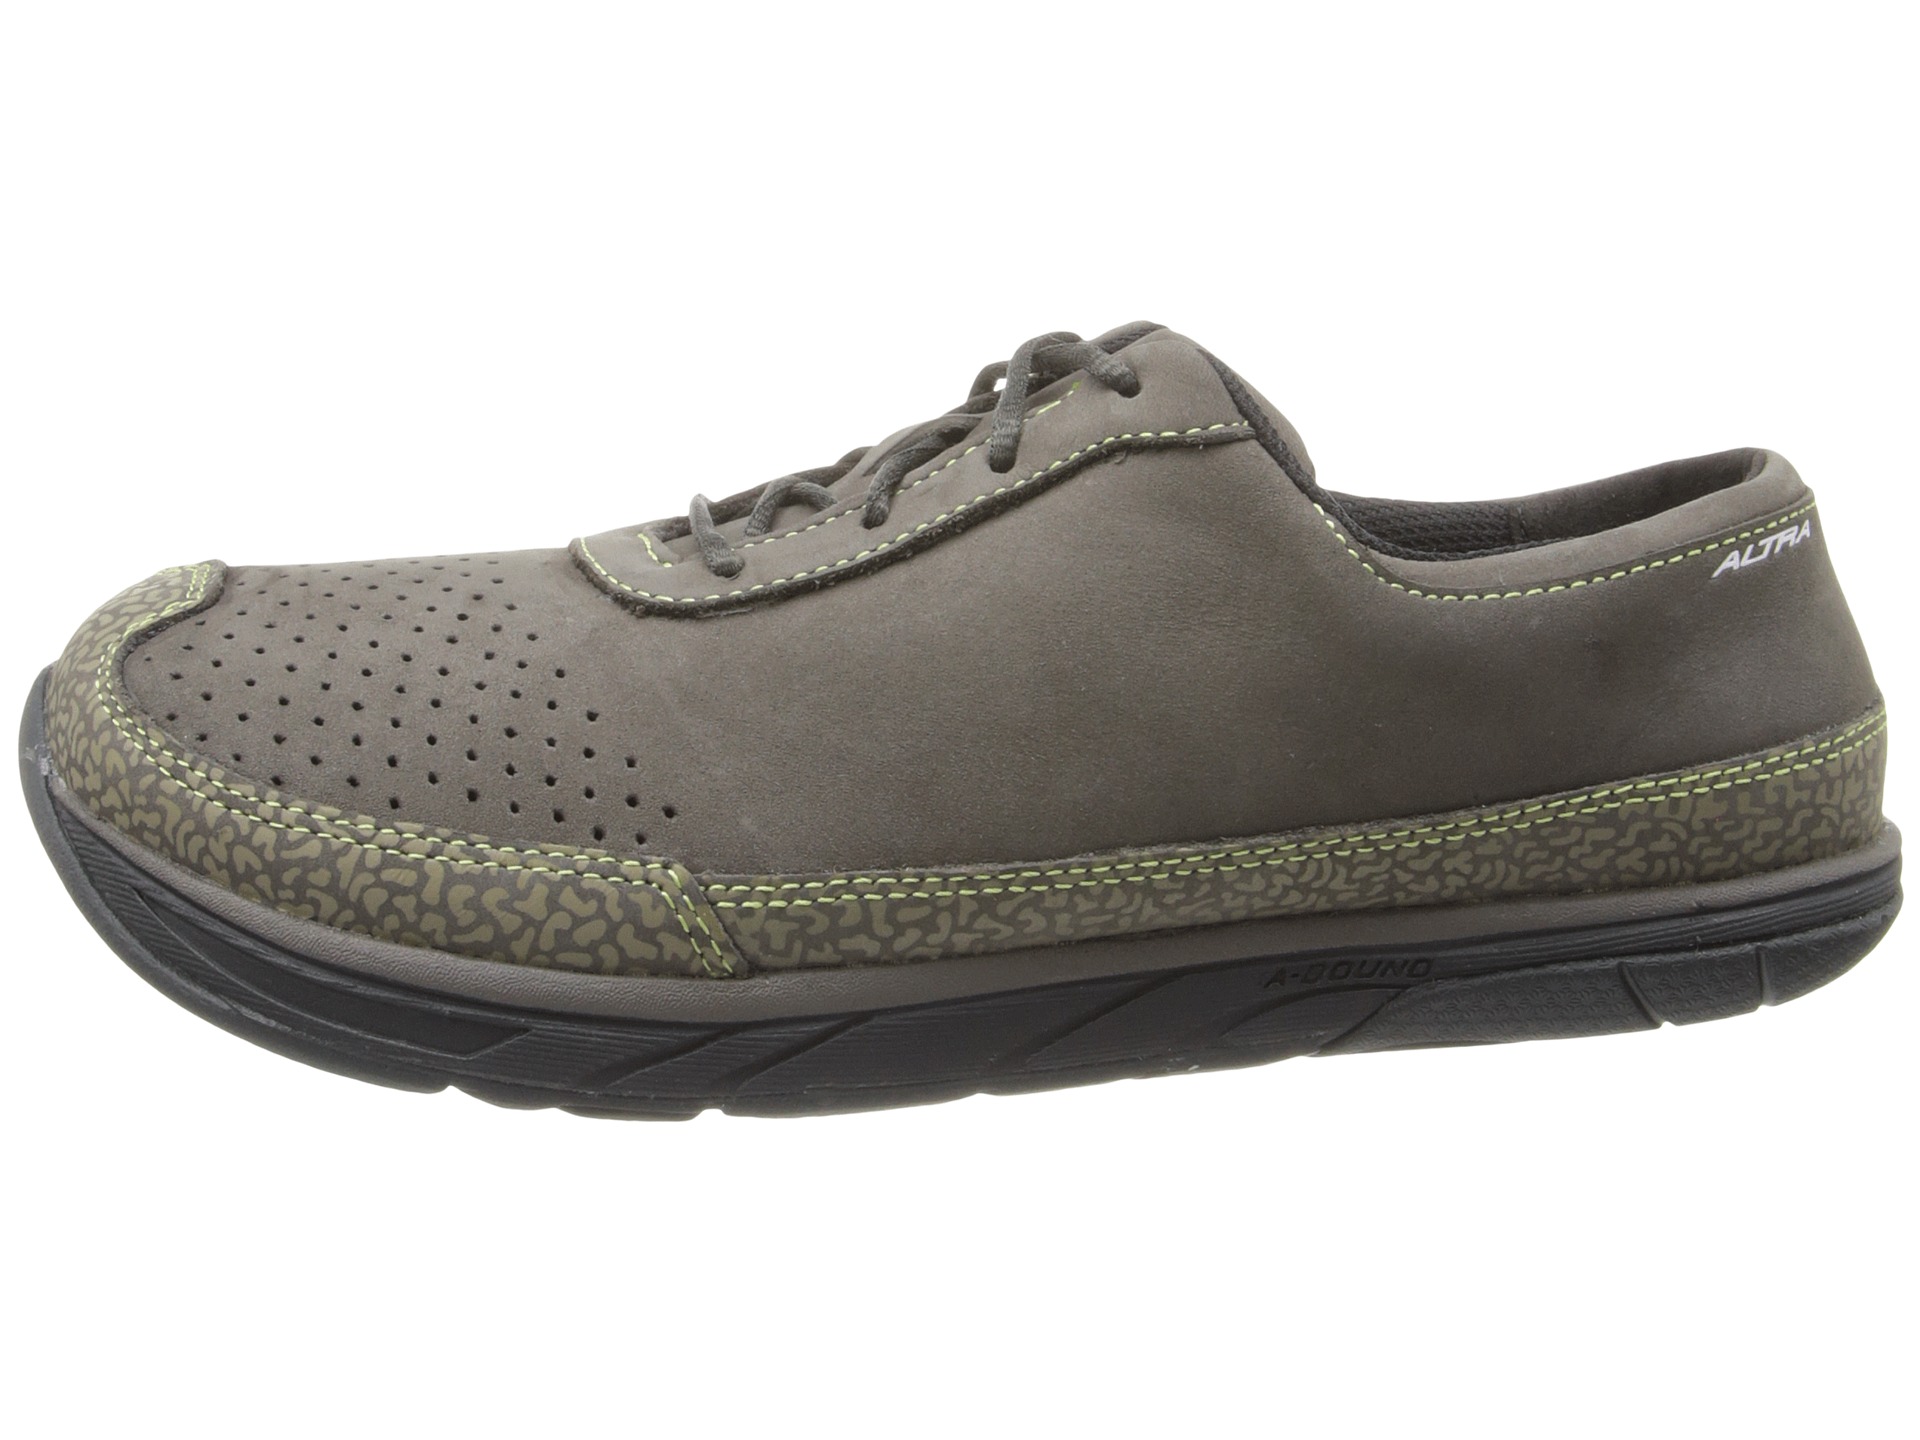 Altra Zero Drop Footwear Intuition Everyday - Zappos.com Free Shipping ...